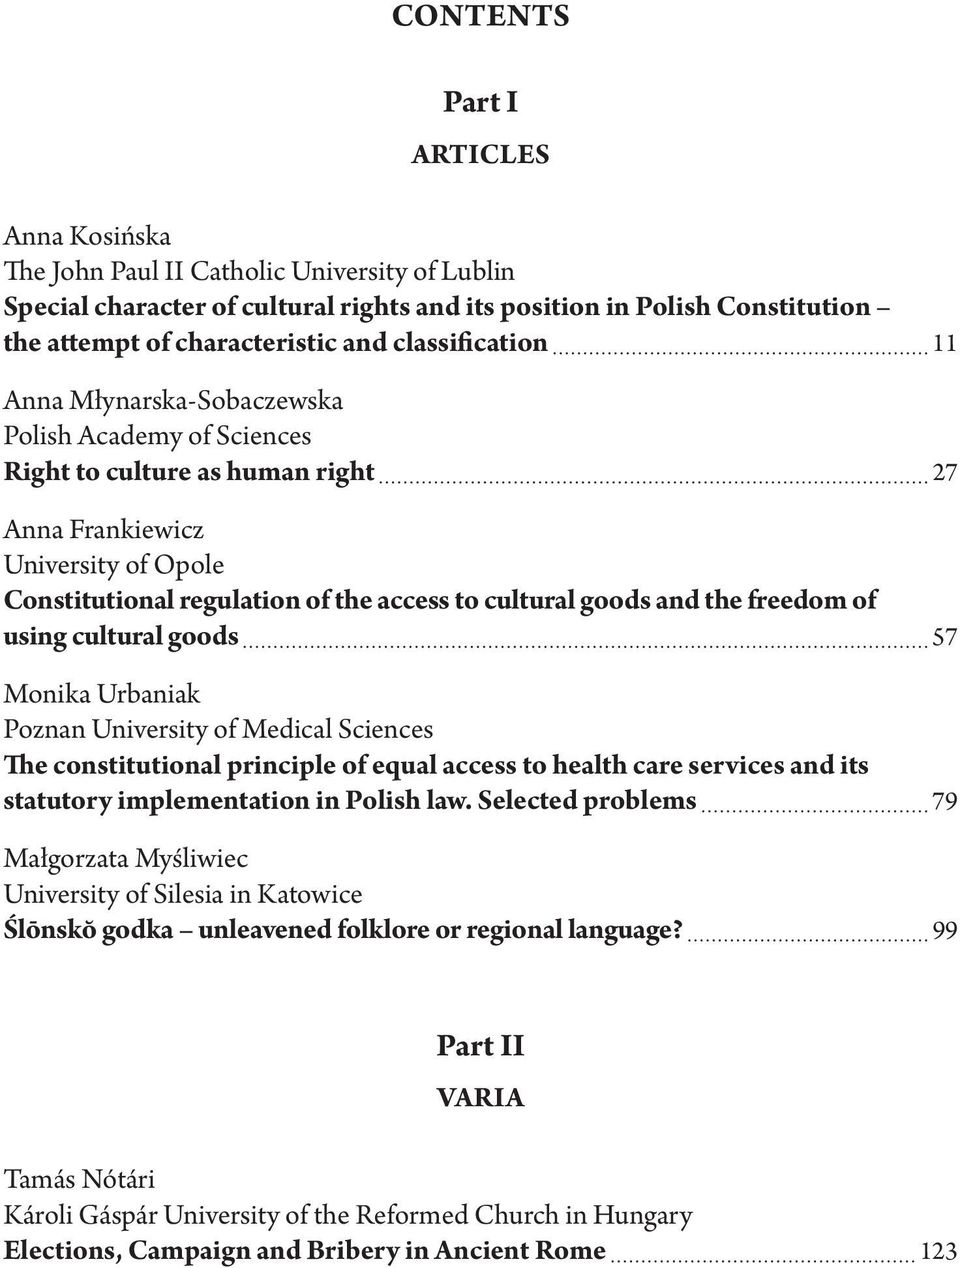 goods and the freedom of using cultural goods 57 Monika Urbaniak Poznan University of Medical Sciences The constitutional principle of equal access to health care services and its statutory